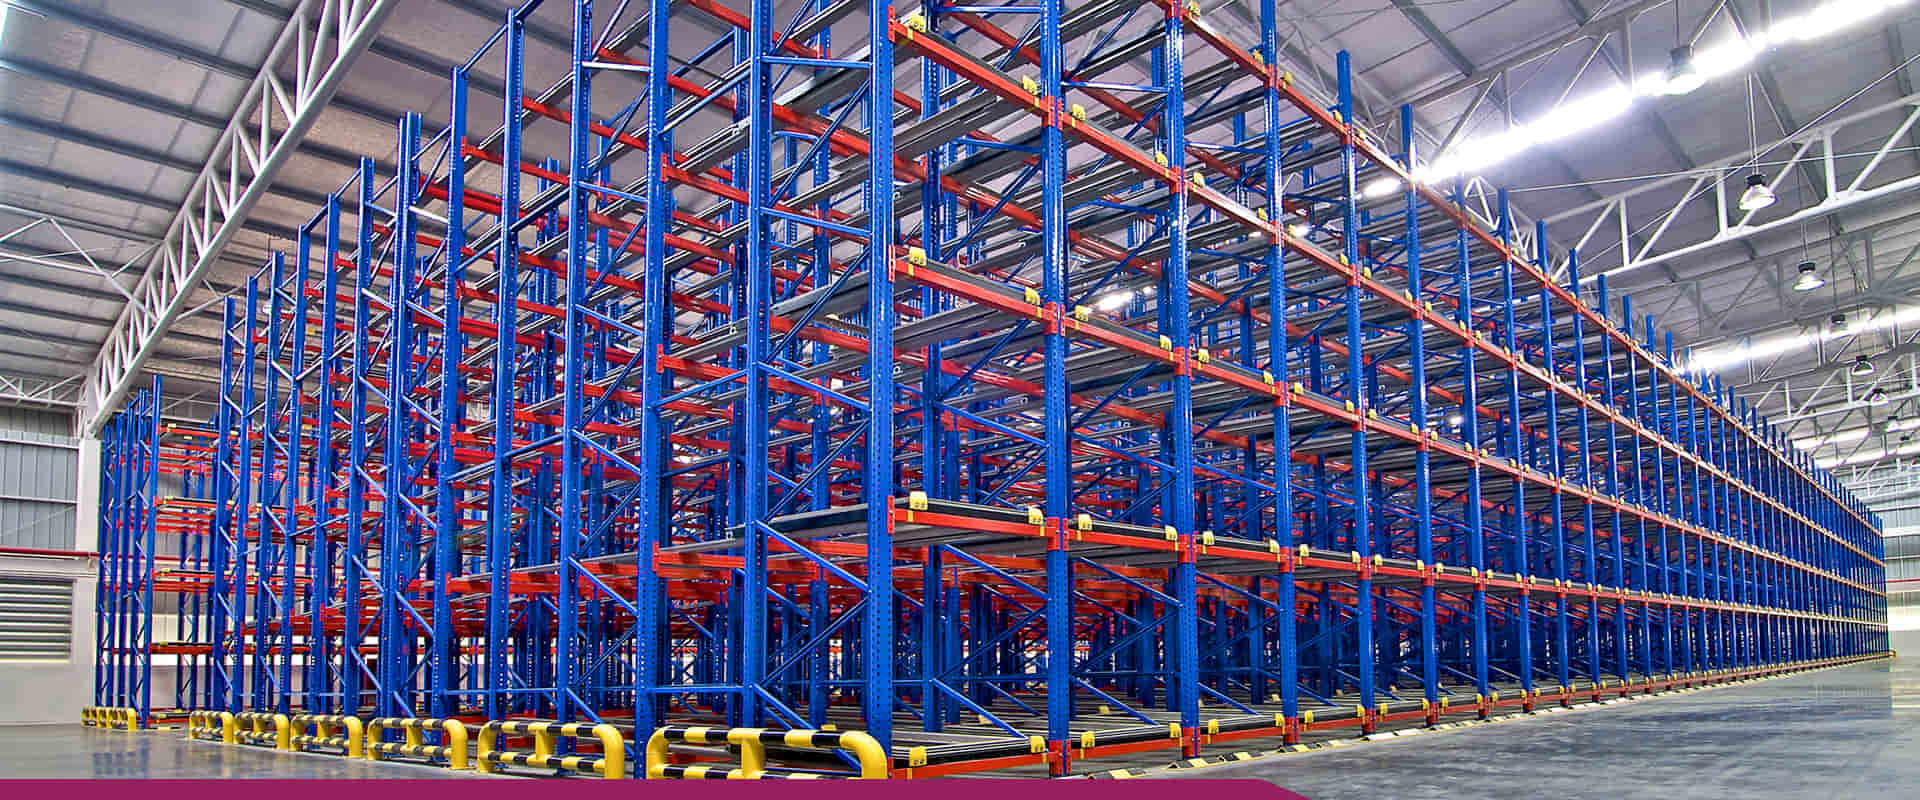 India’s Top Warehouse And Industrial Storage Racks Manufacturer In Pathredi